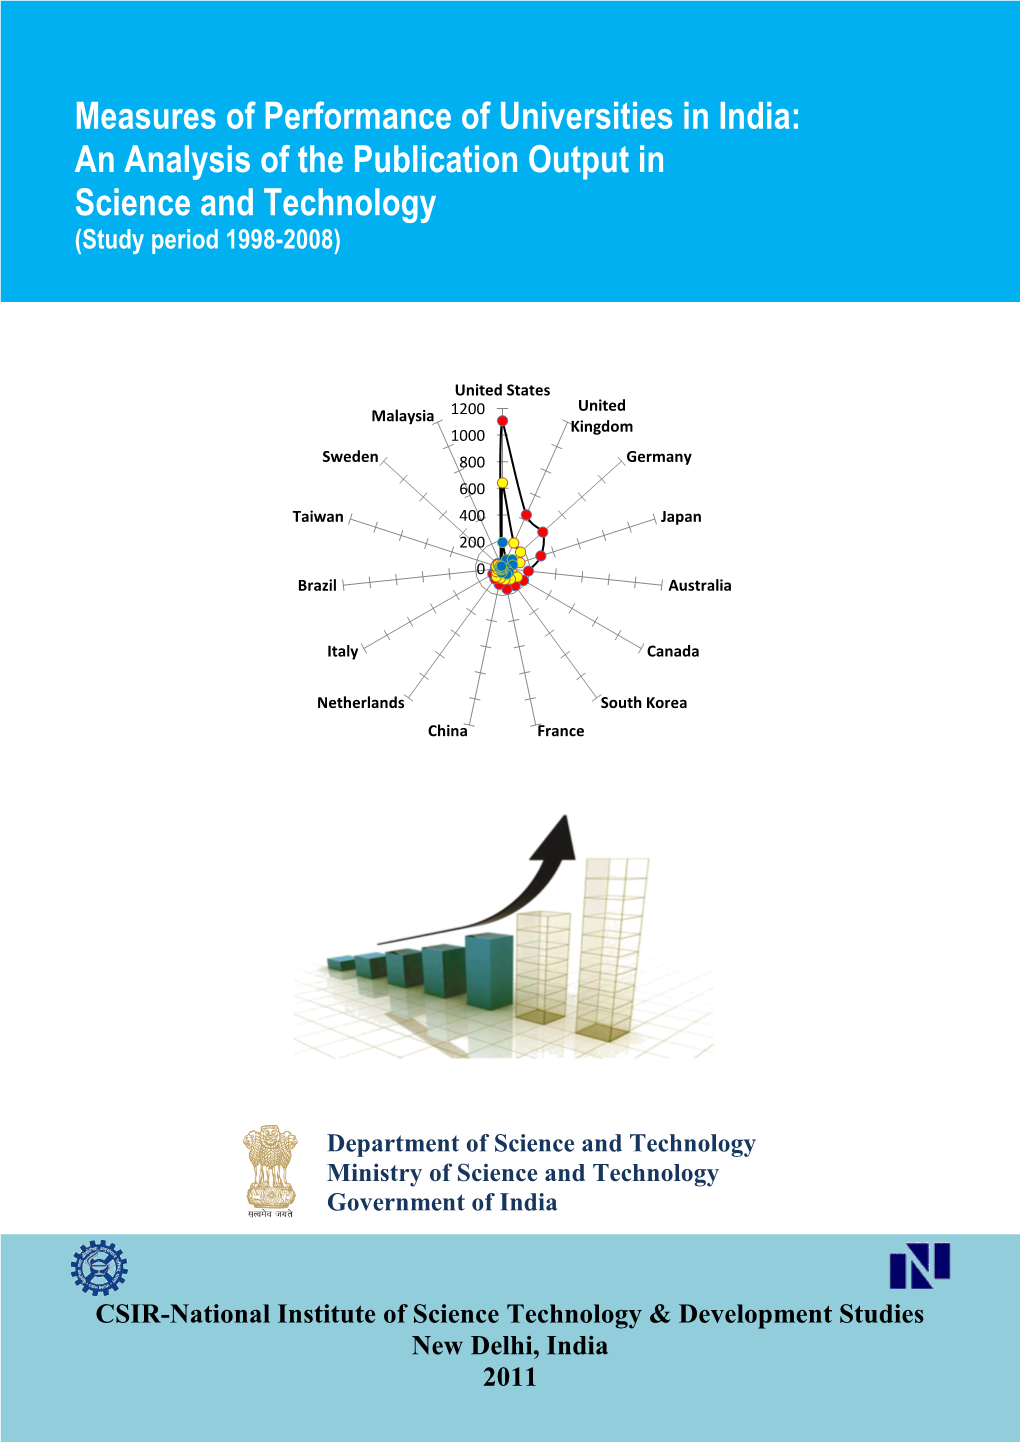 Measures of Performance of Universities in India: an Analysis of the Publication Output in Science and Technology (Study Period 1998-2008)